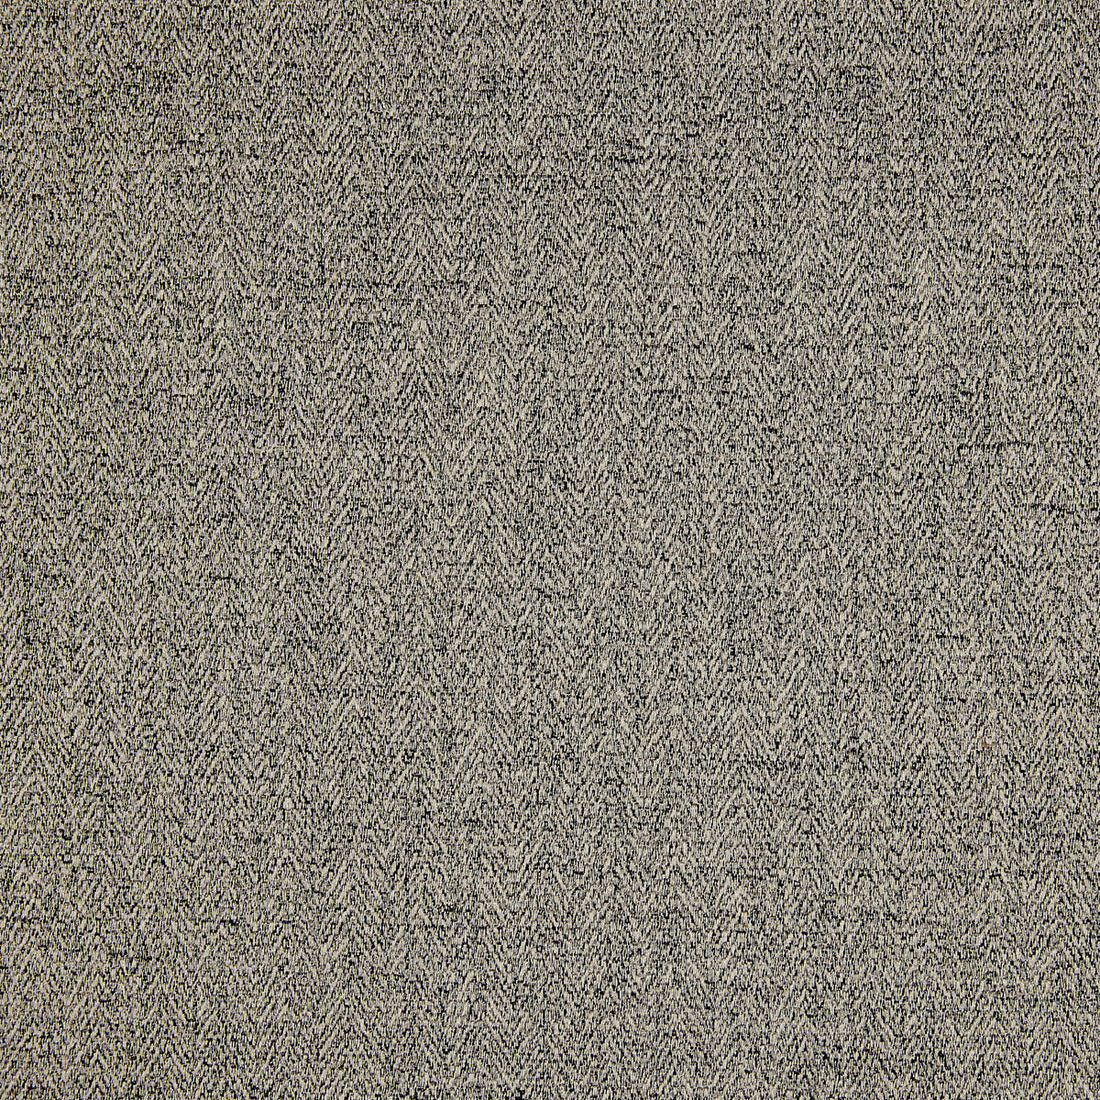 Brummell fabric in 1 color - pattern LZ-30363.01.0 - by Kravet Design in the Lizzo collection